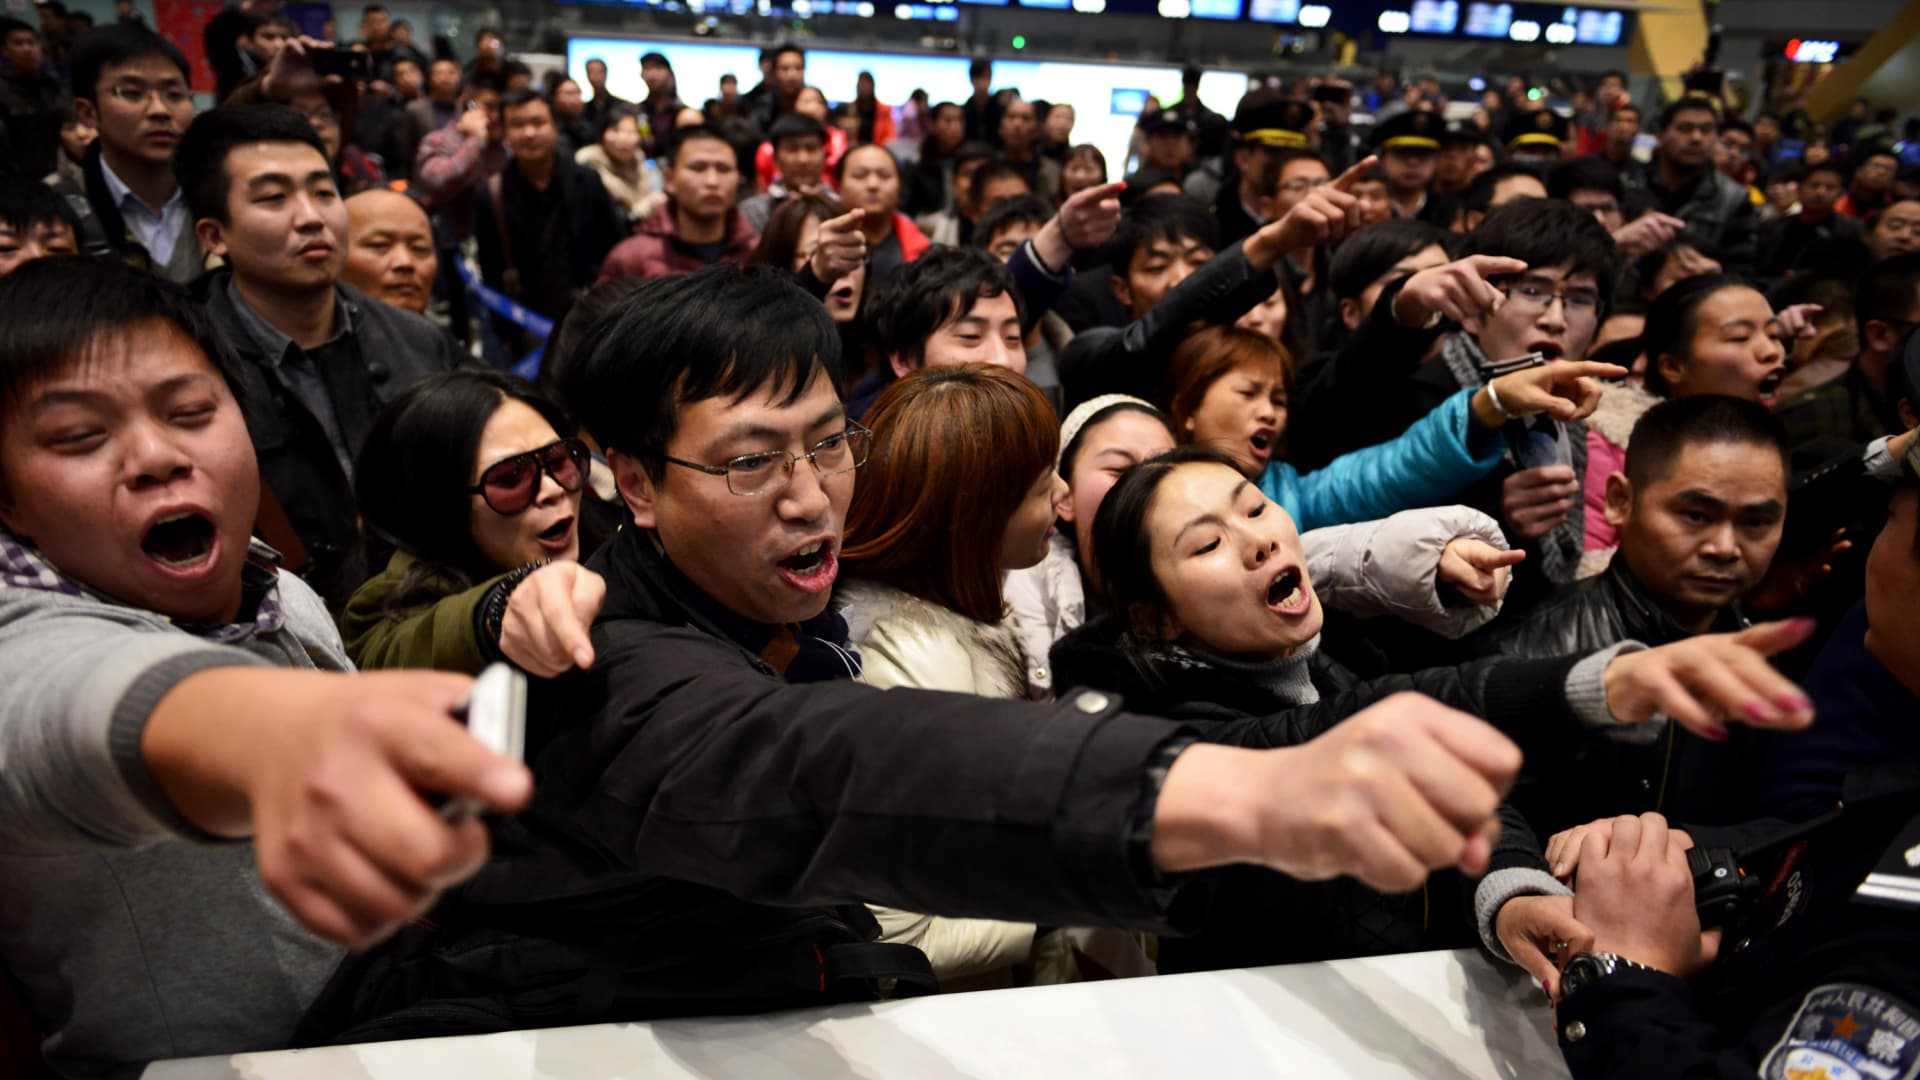 Stranded passengers crowd an airline counter at Changshui International Airport in Kunming, China on Jan. 4, 2013.